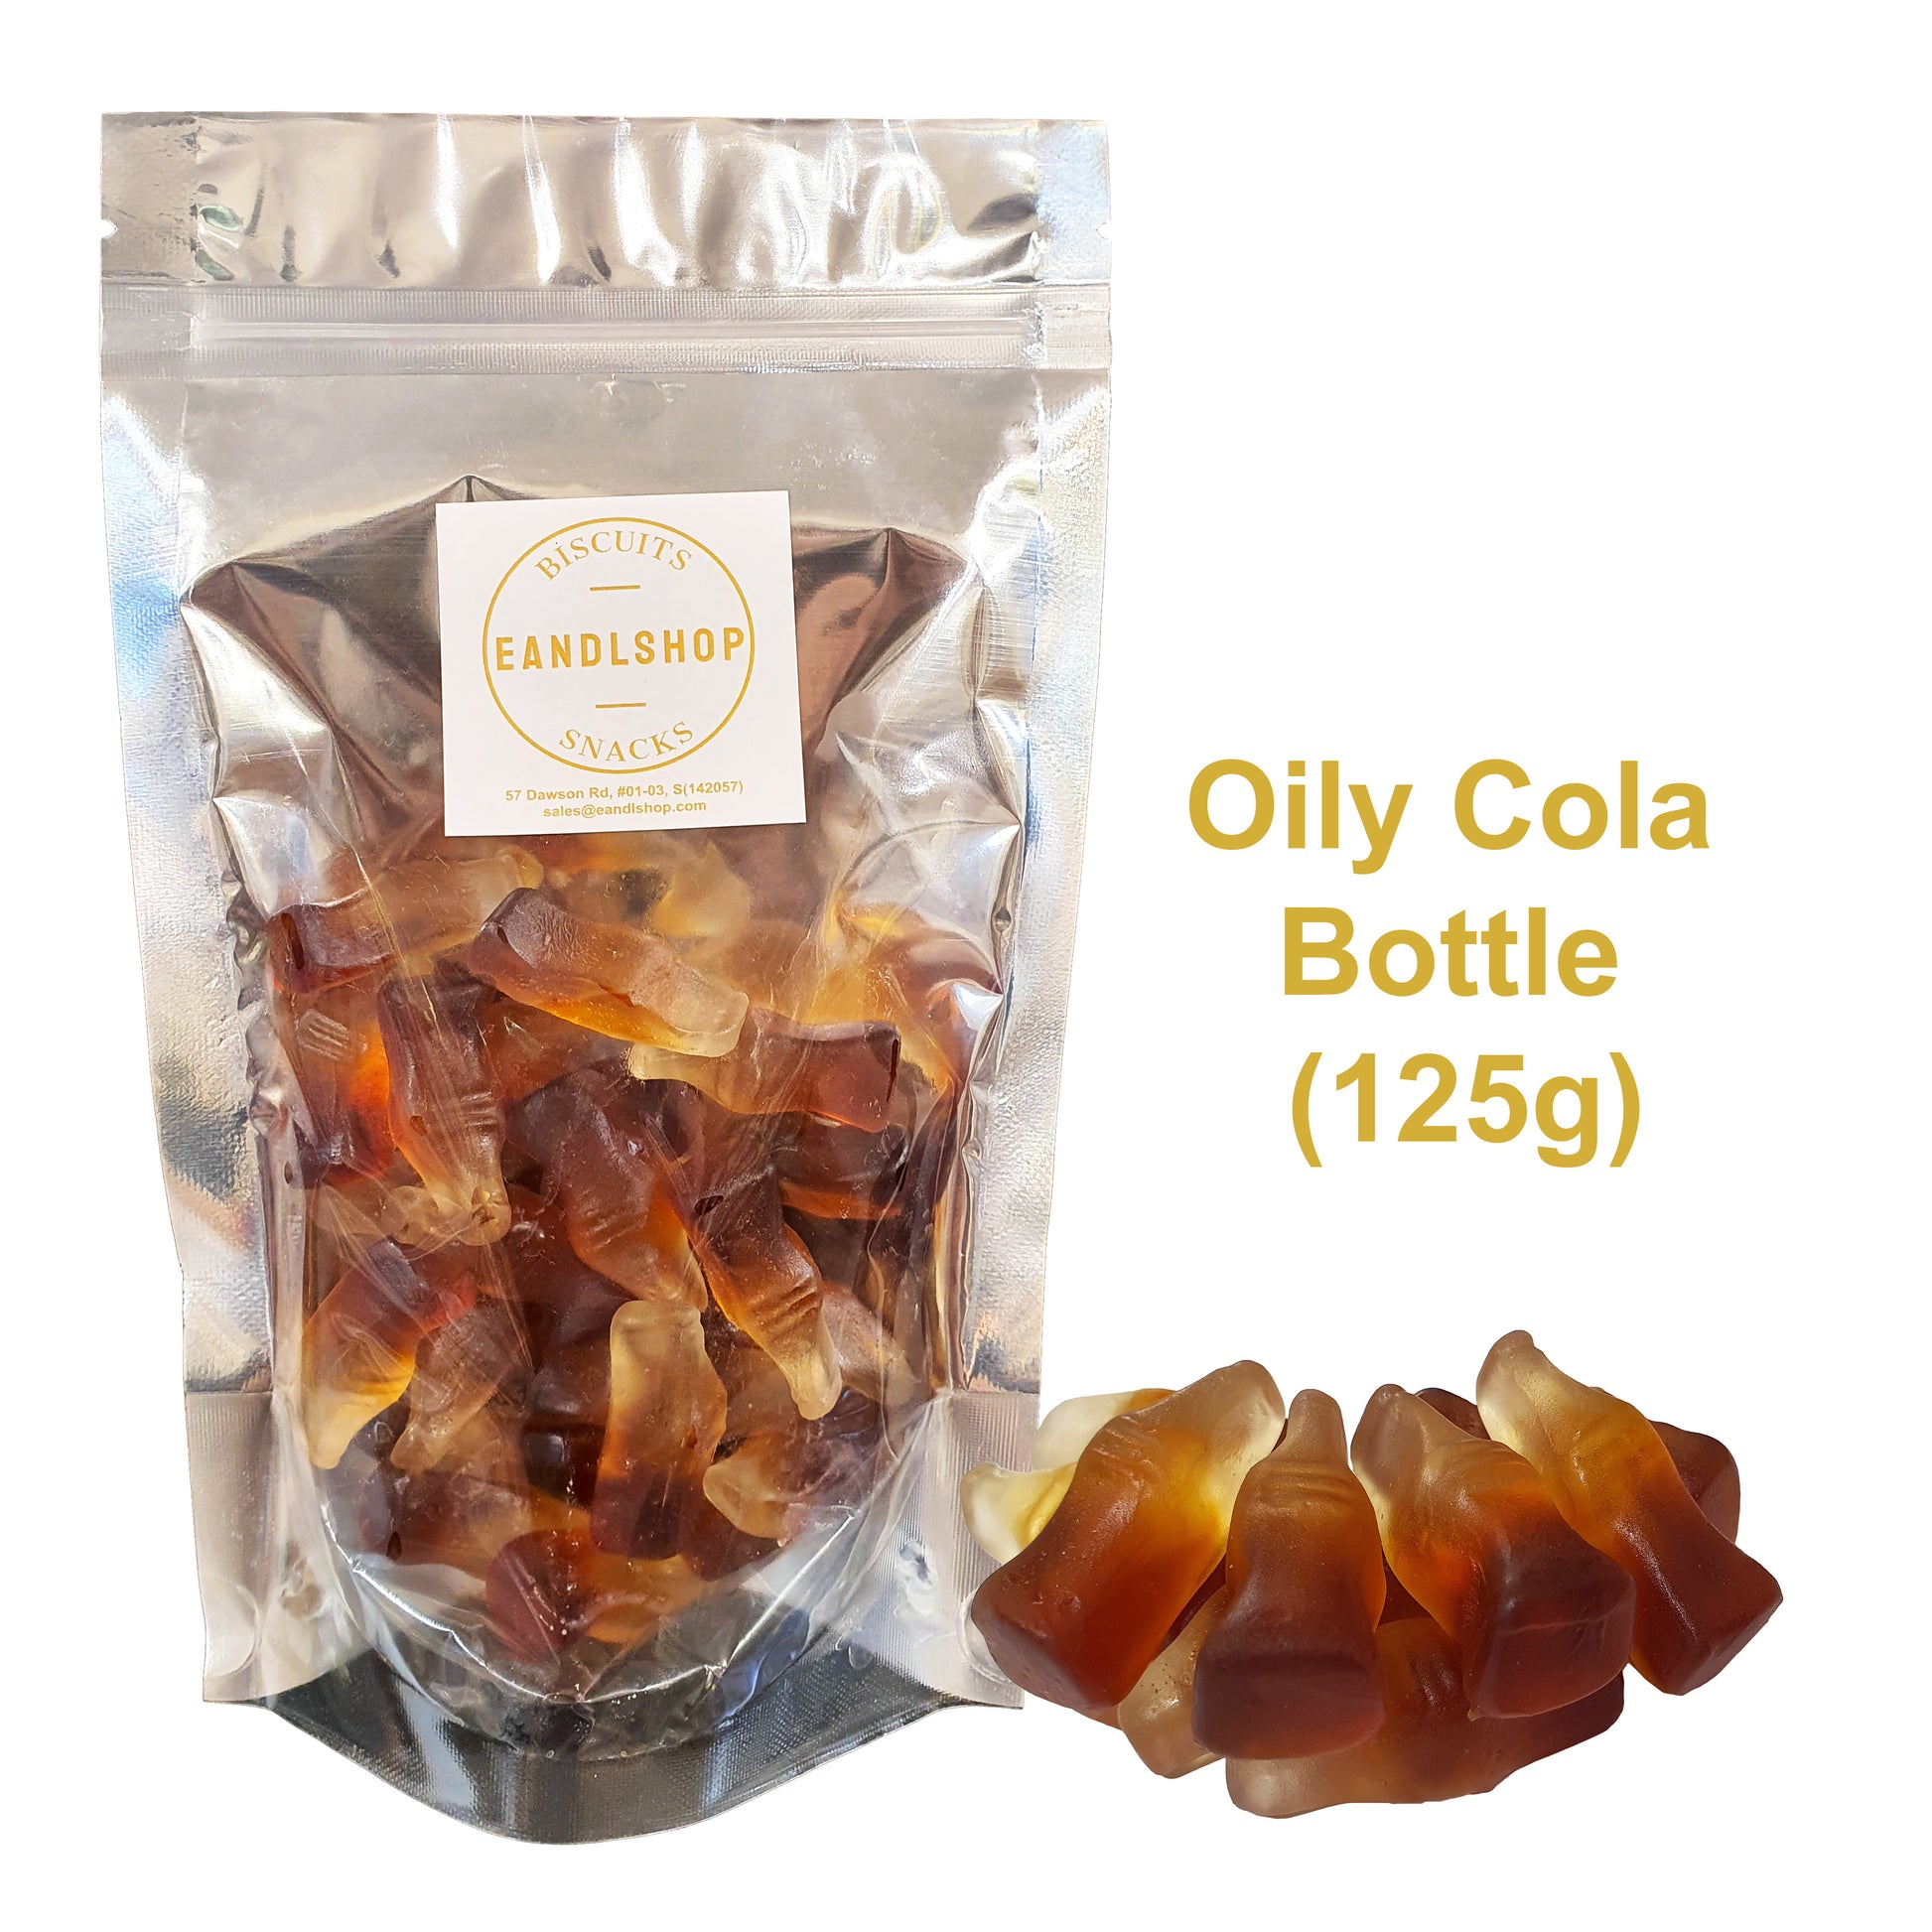 Bebeto Oily Cola Bottle . Old-school biscuits, modern snacks (chips, crackers), cakes, gummies, plums, dried fruits, nuts, herbal tea – available at www.EANDLSHOP.com